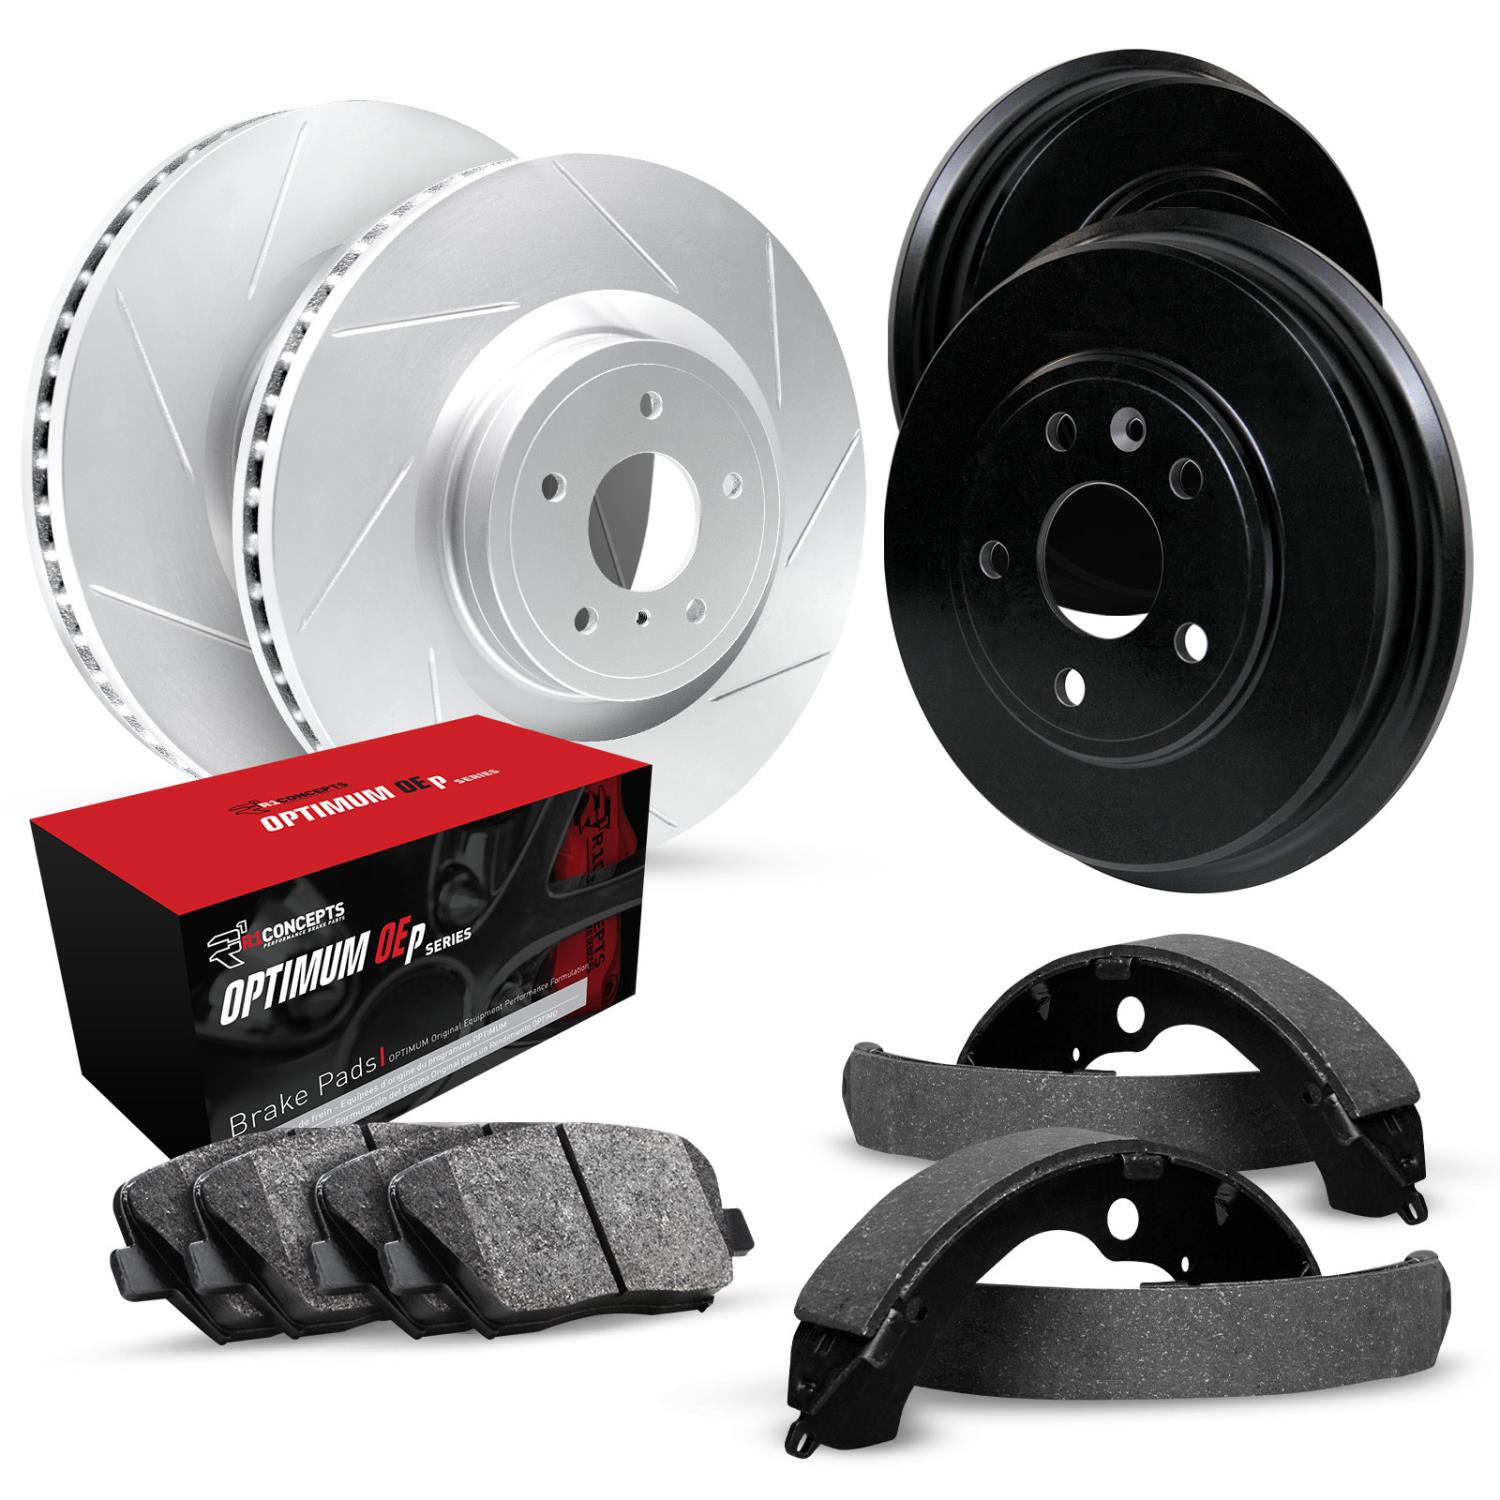 GEO-Carbon Slotted Brake Rotor & Drum Set w/Optimum OE Pads & Shoes, 1999-2001 Acura/Honda, Position: Front & Rear